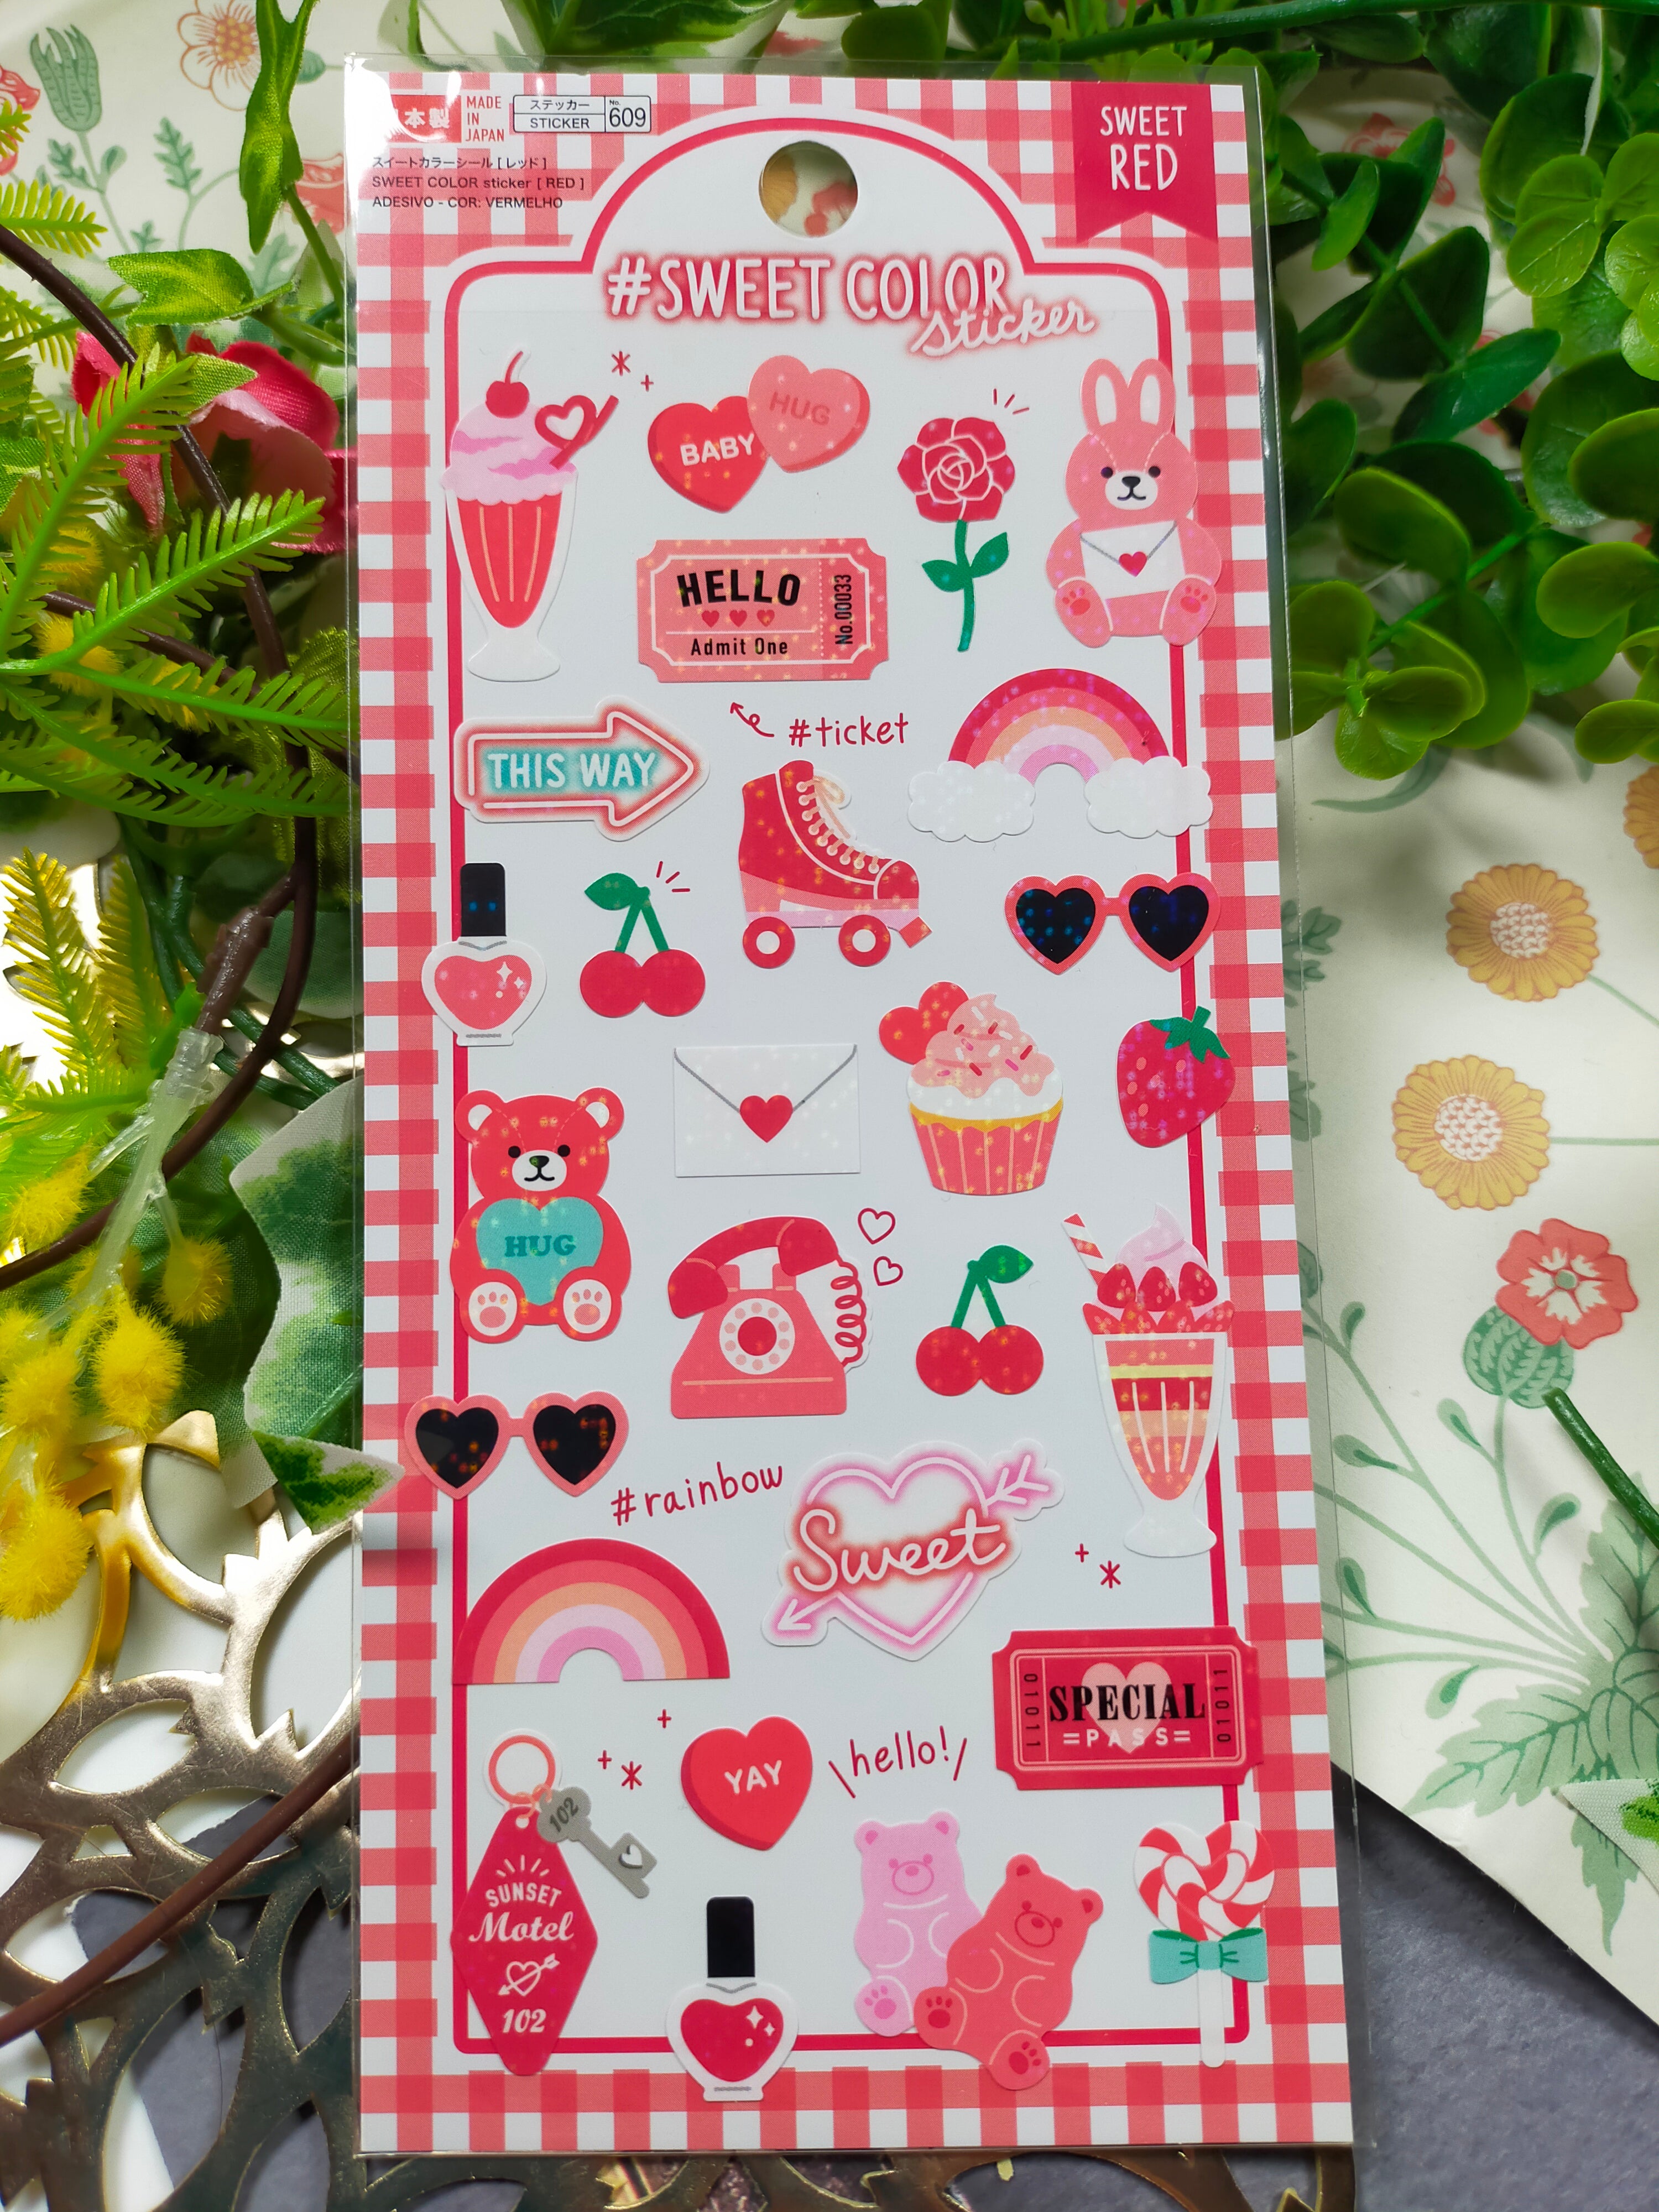 Petit sweet color stickers ,daiso _ Red / Pink / Orange / Yellow / Green /  Blue / Purple / white / Black